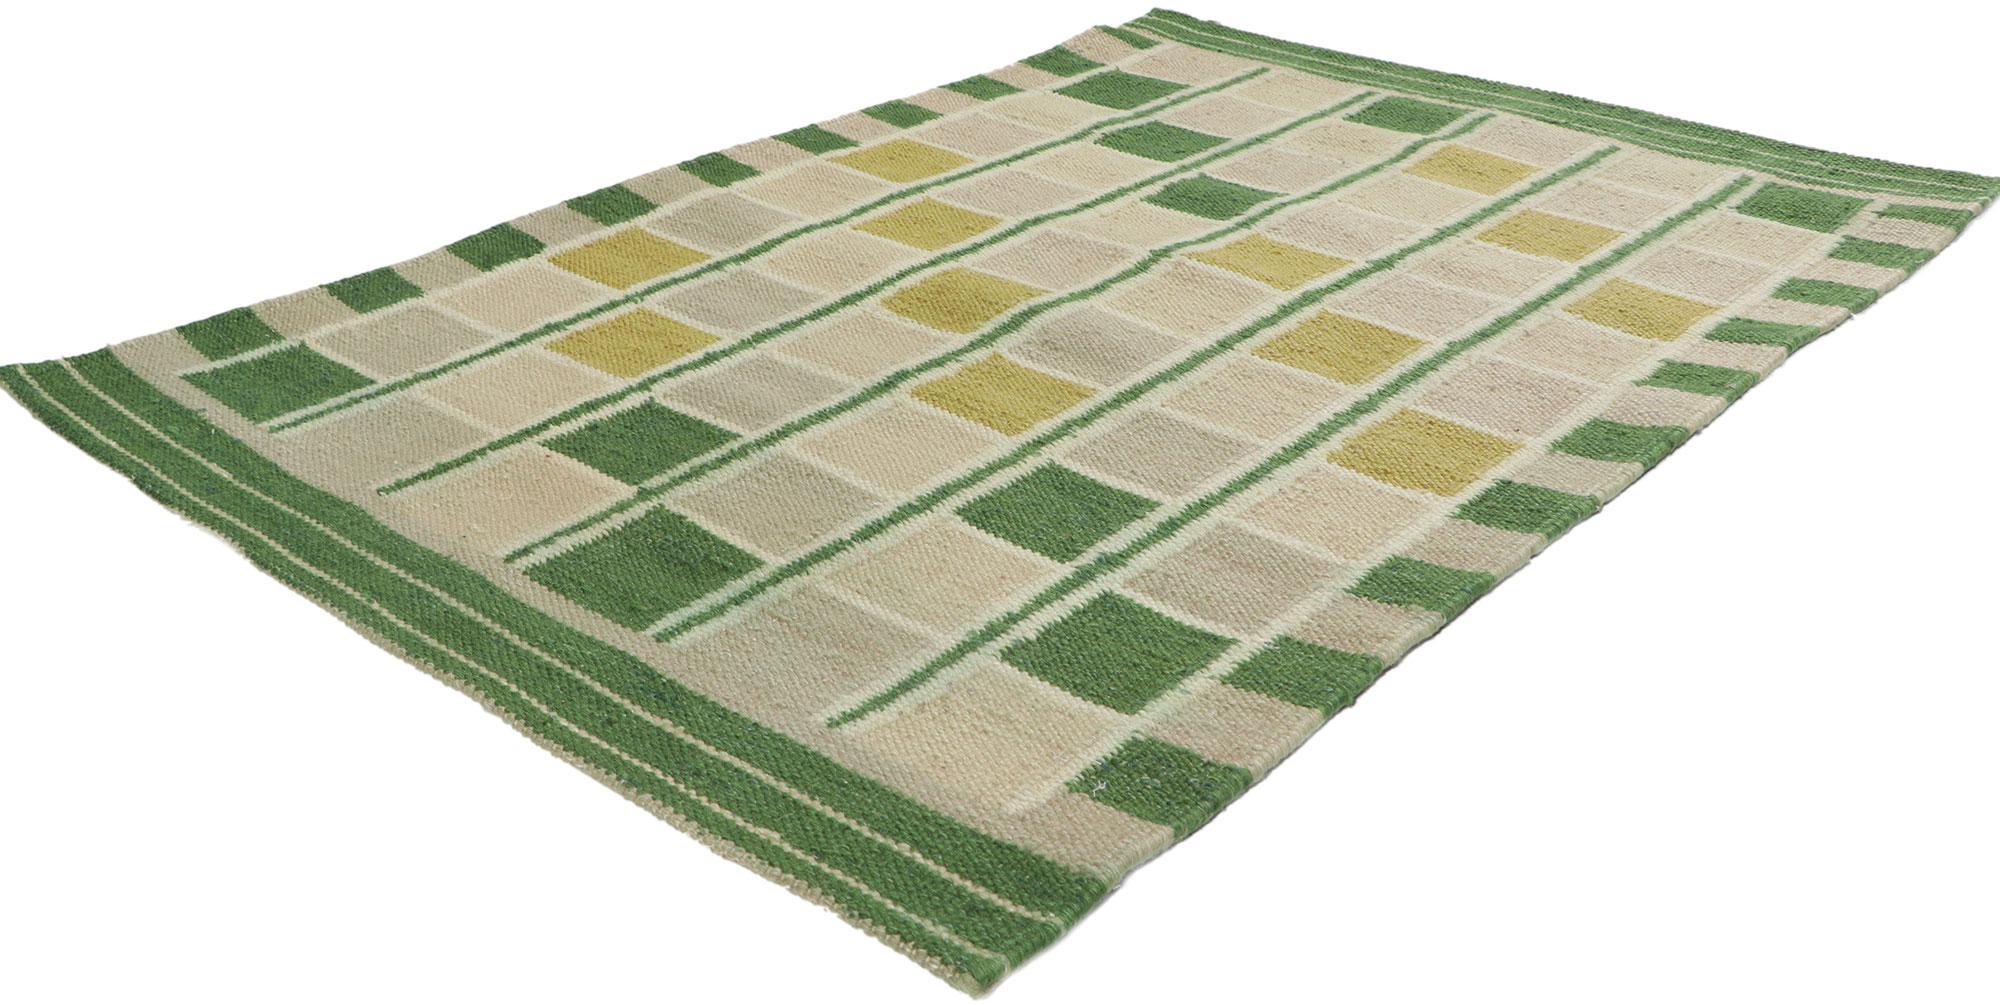 With its geometric design and earthy colorway, this hand-woven wool Swedish inspired Kilim rug beautifully embodies the simplicity of Scandinavian modern style. The abrashed field features an all-over checkerboard pattern comprised of squares and